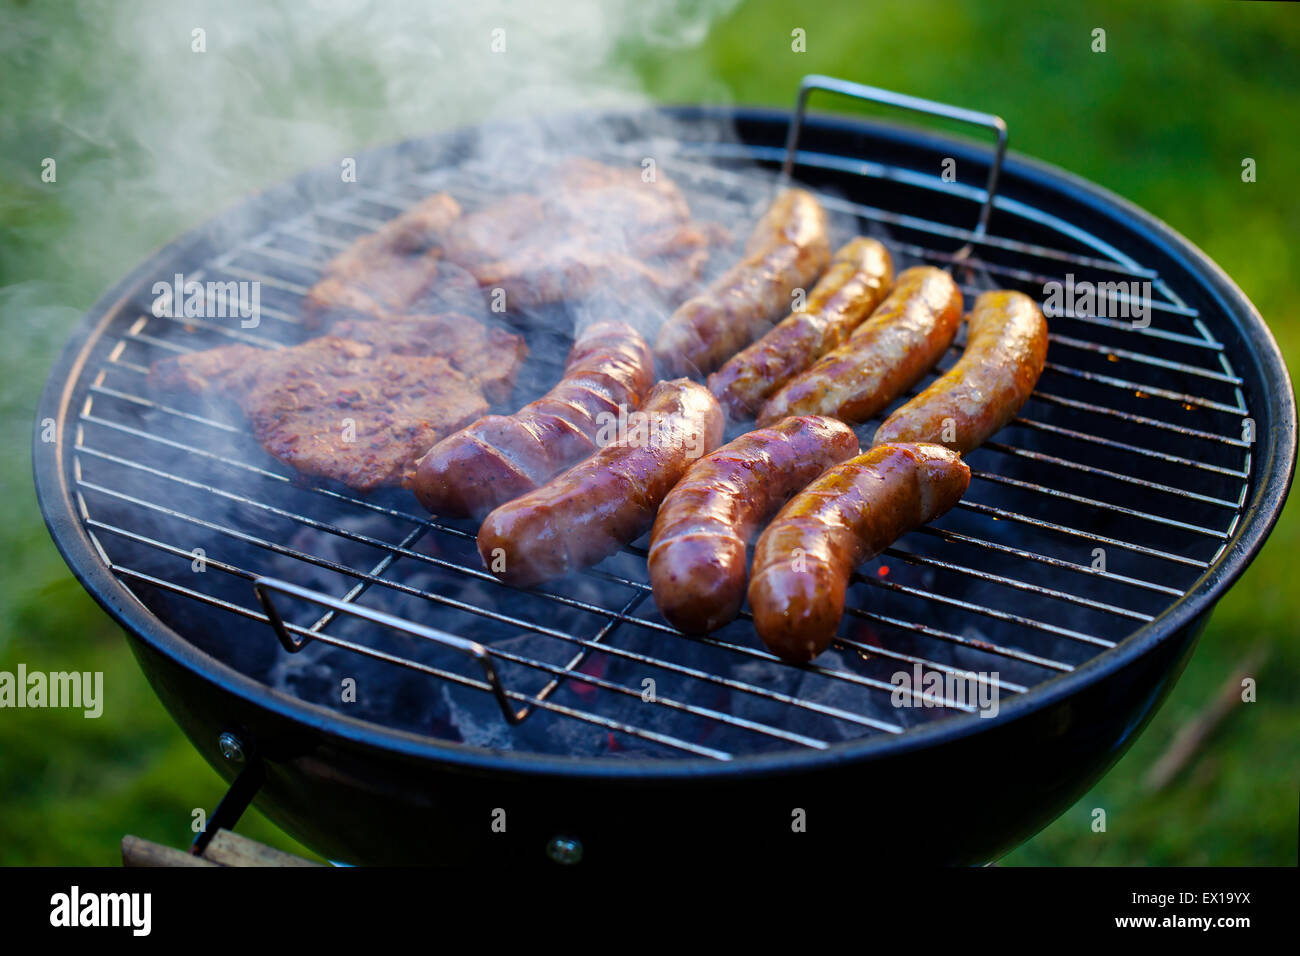 Sausages on barbecue Stock Photo